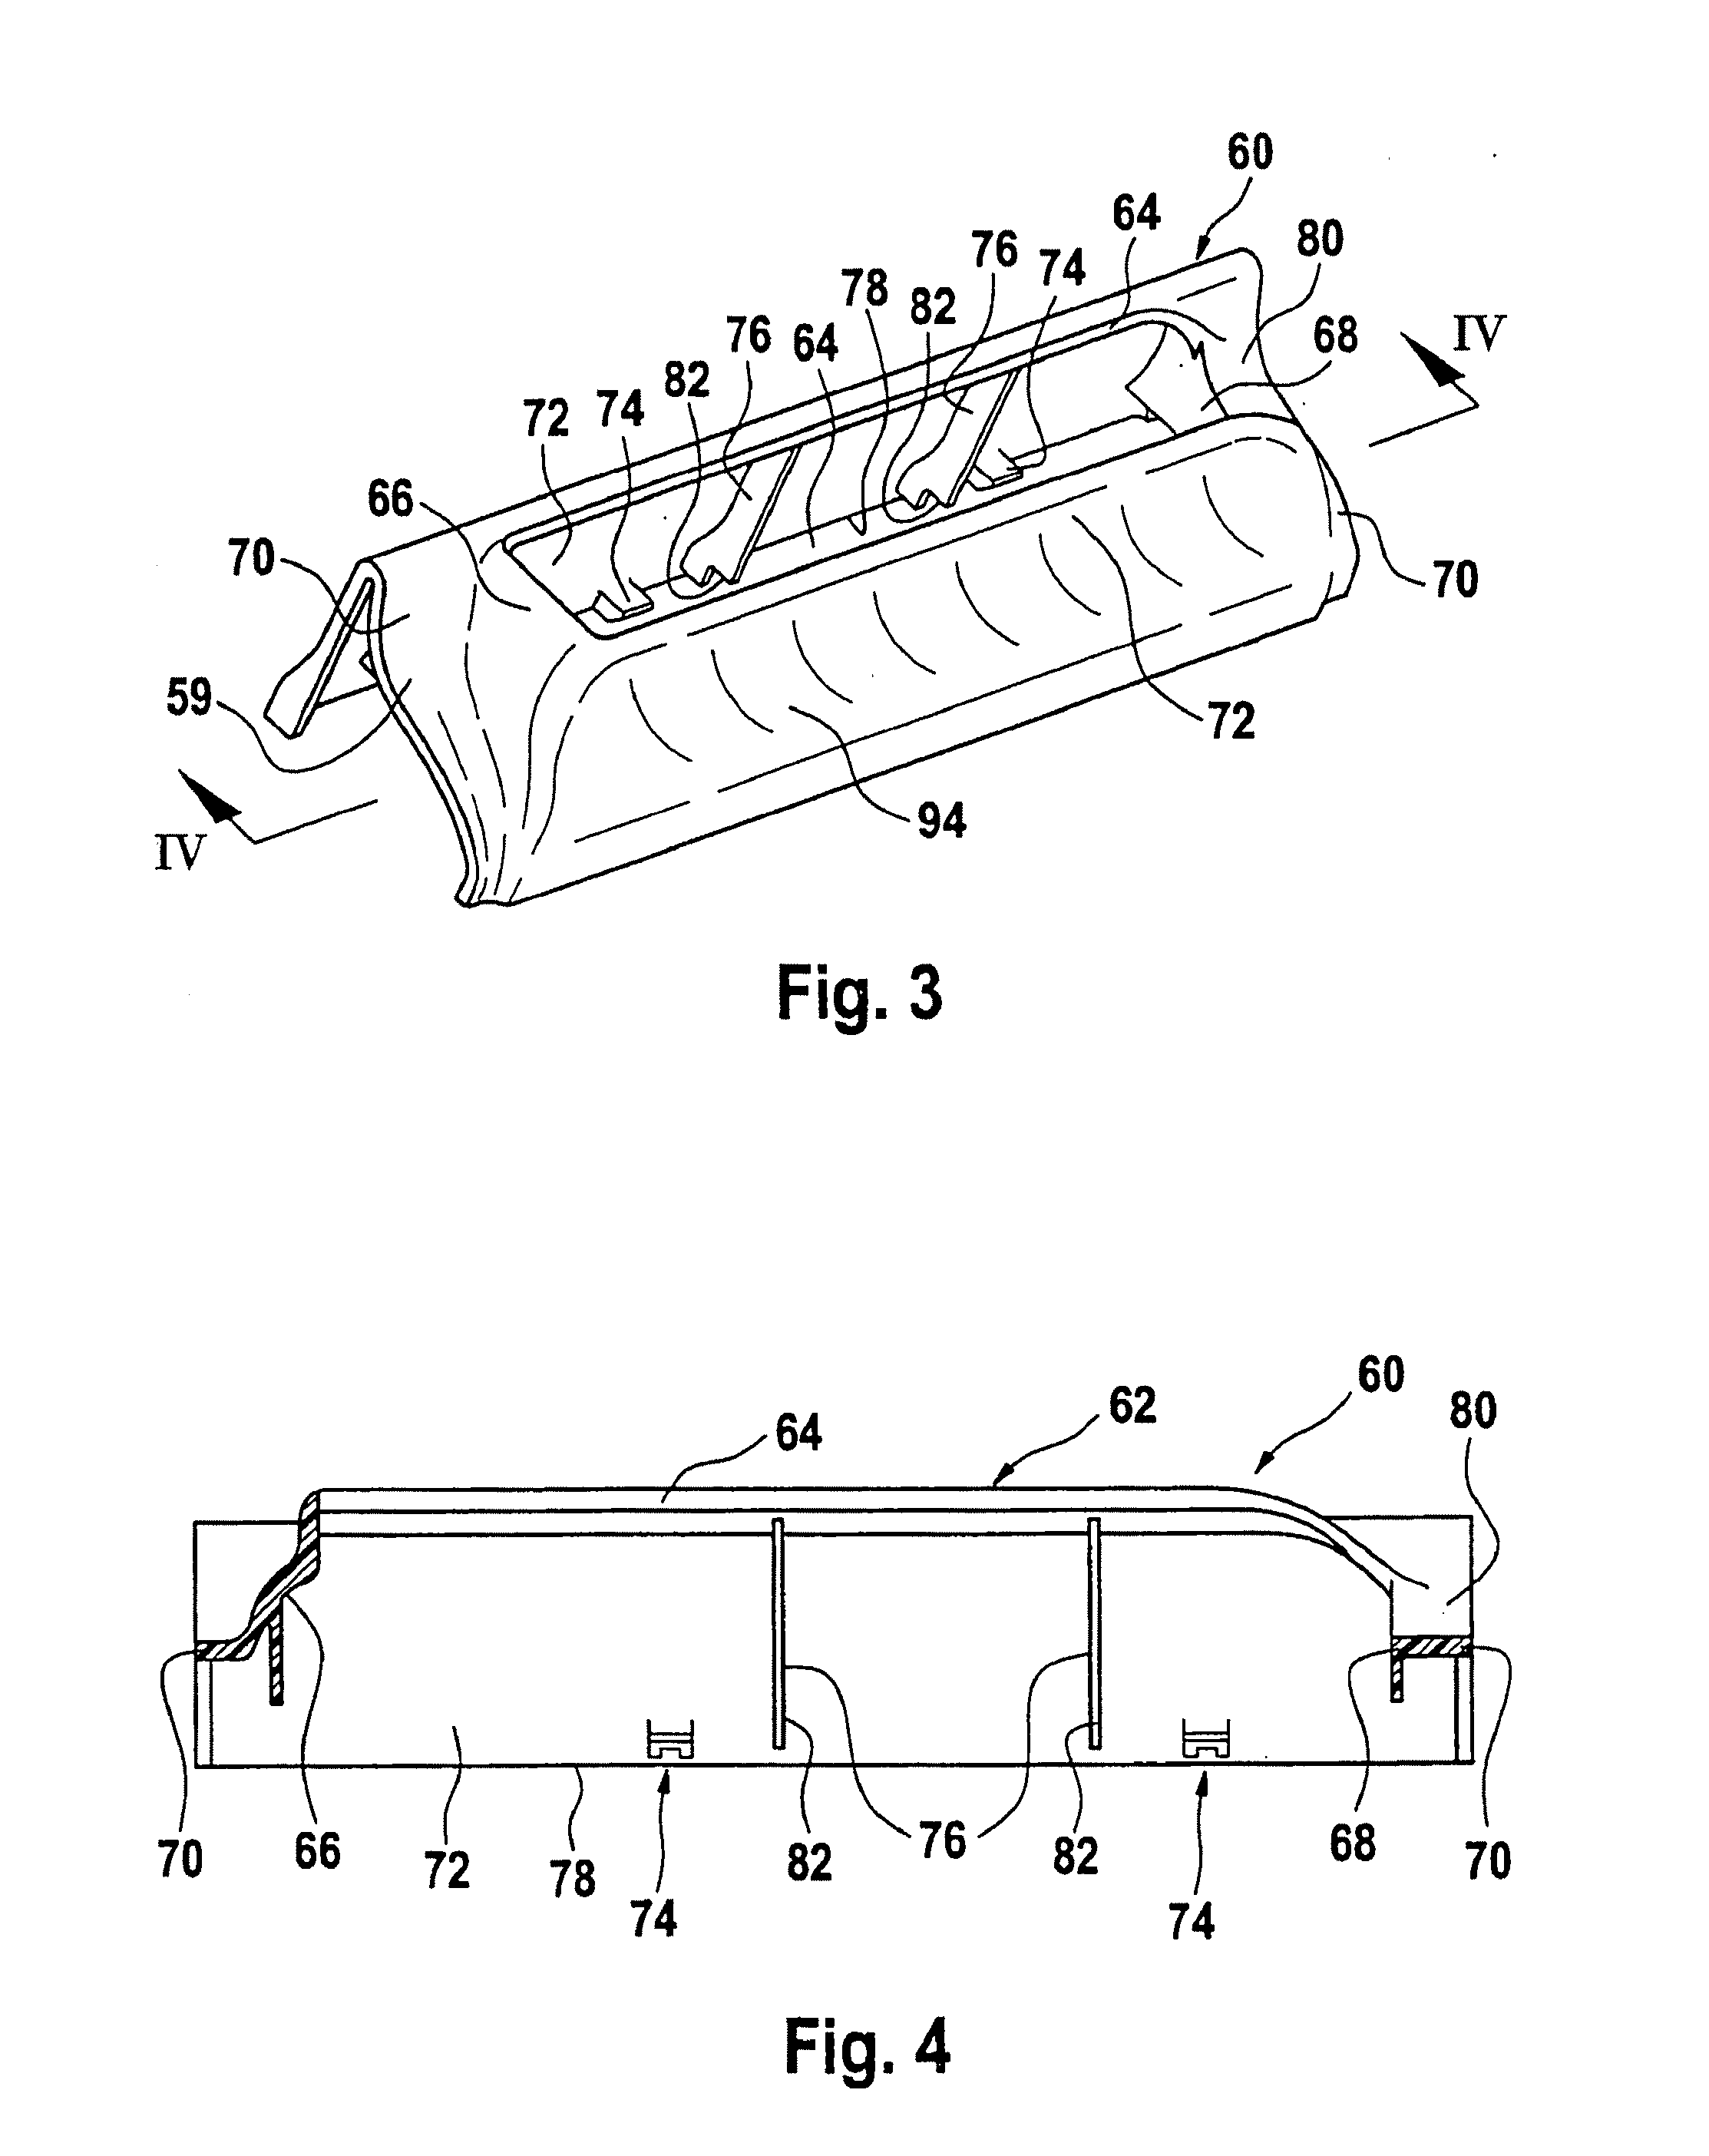 Wiper lever with a driven wiper arm and a wiper blade